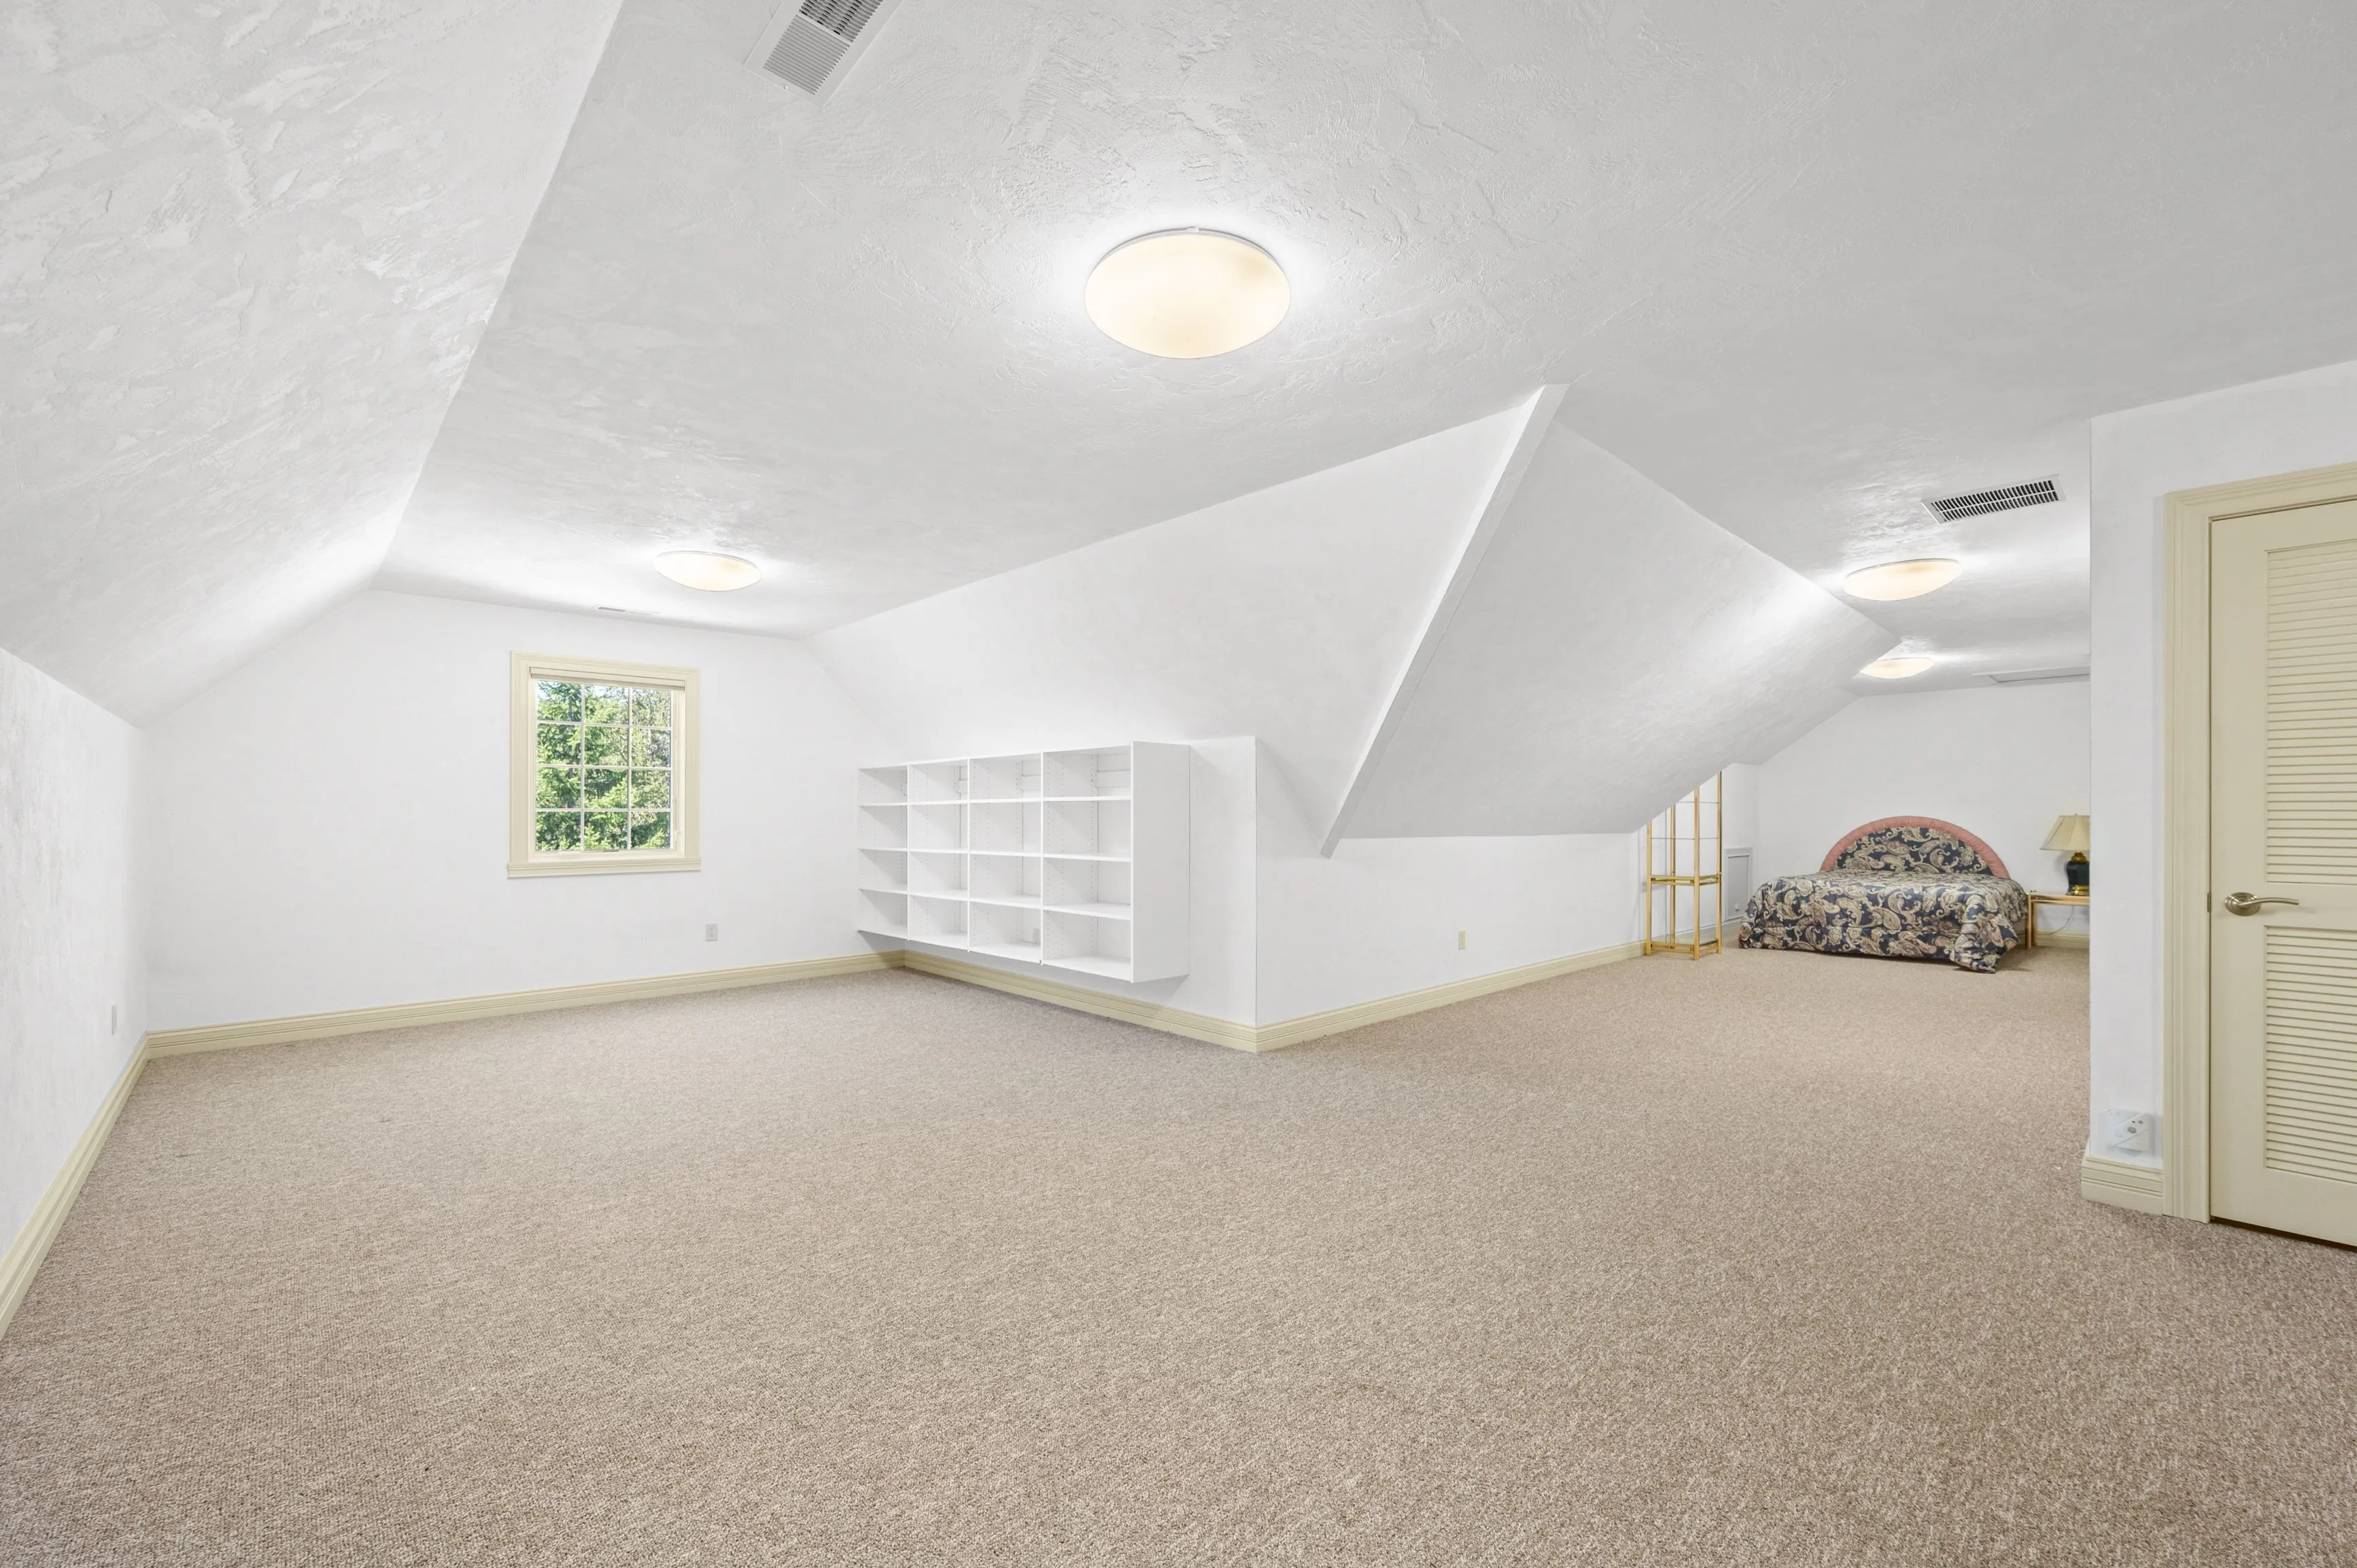 Bright and spacious attic room with slanted ceilings, carpeted floor, white walls, built-in shelving unit, and overhead lighting, leading to an adjoining room with a bed visible in the background.